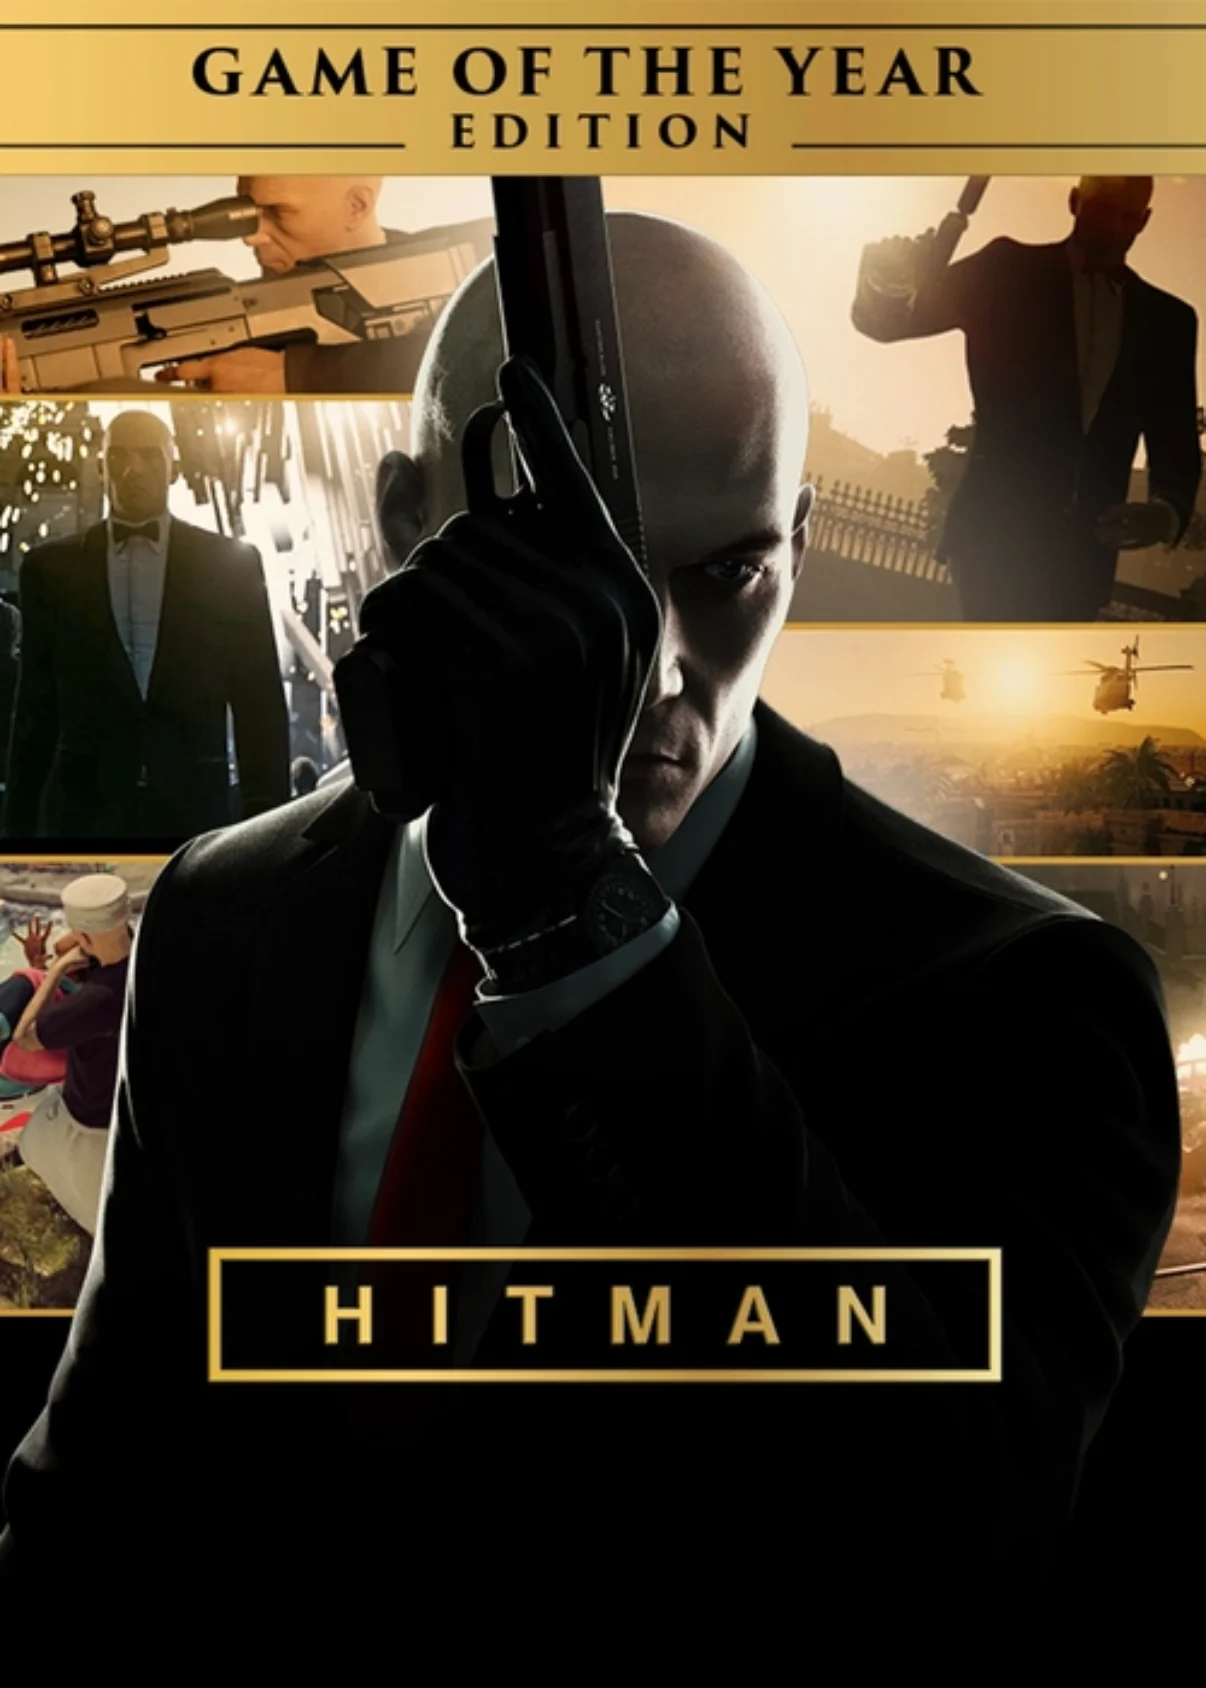 Hitman Game of The Year Edition